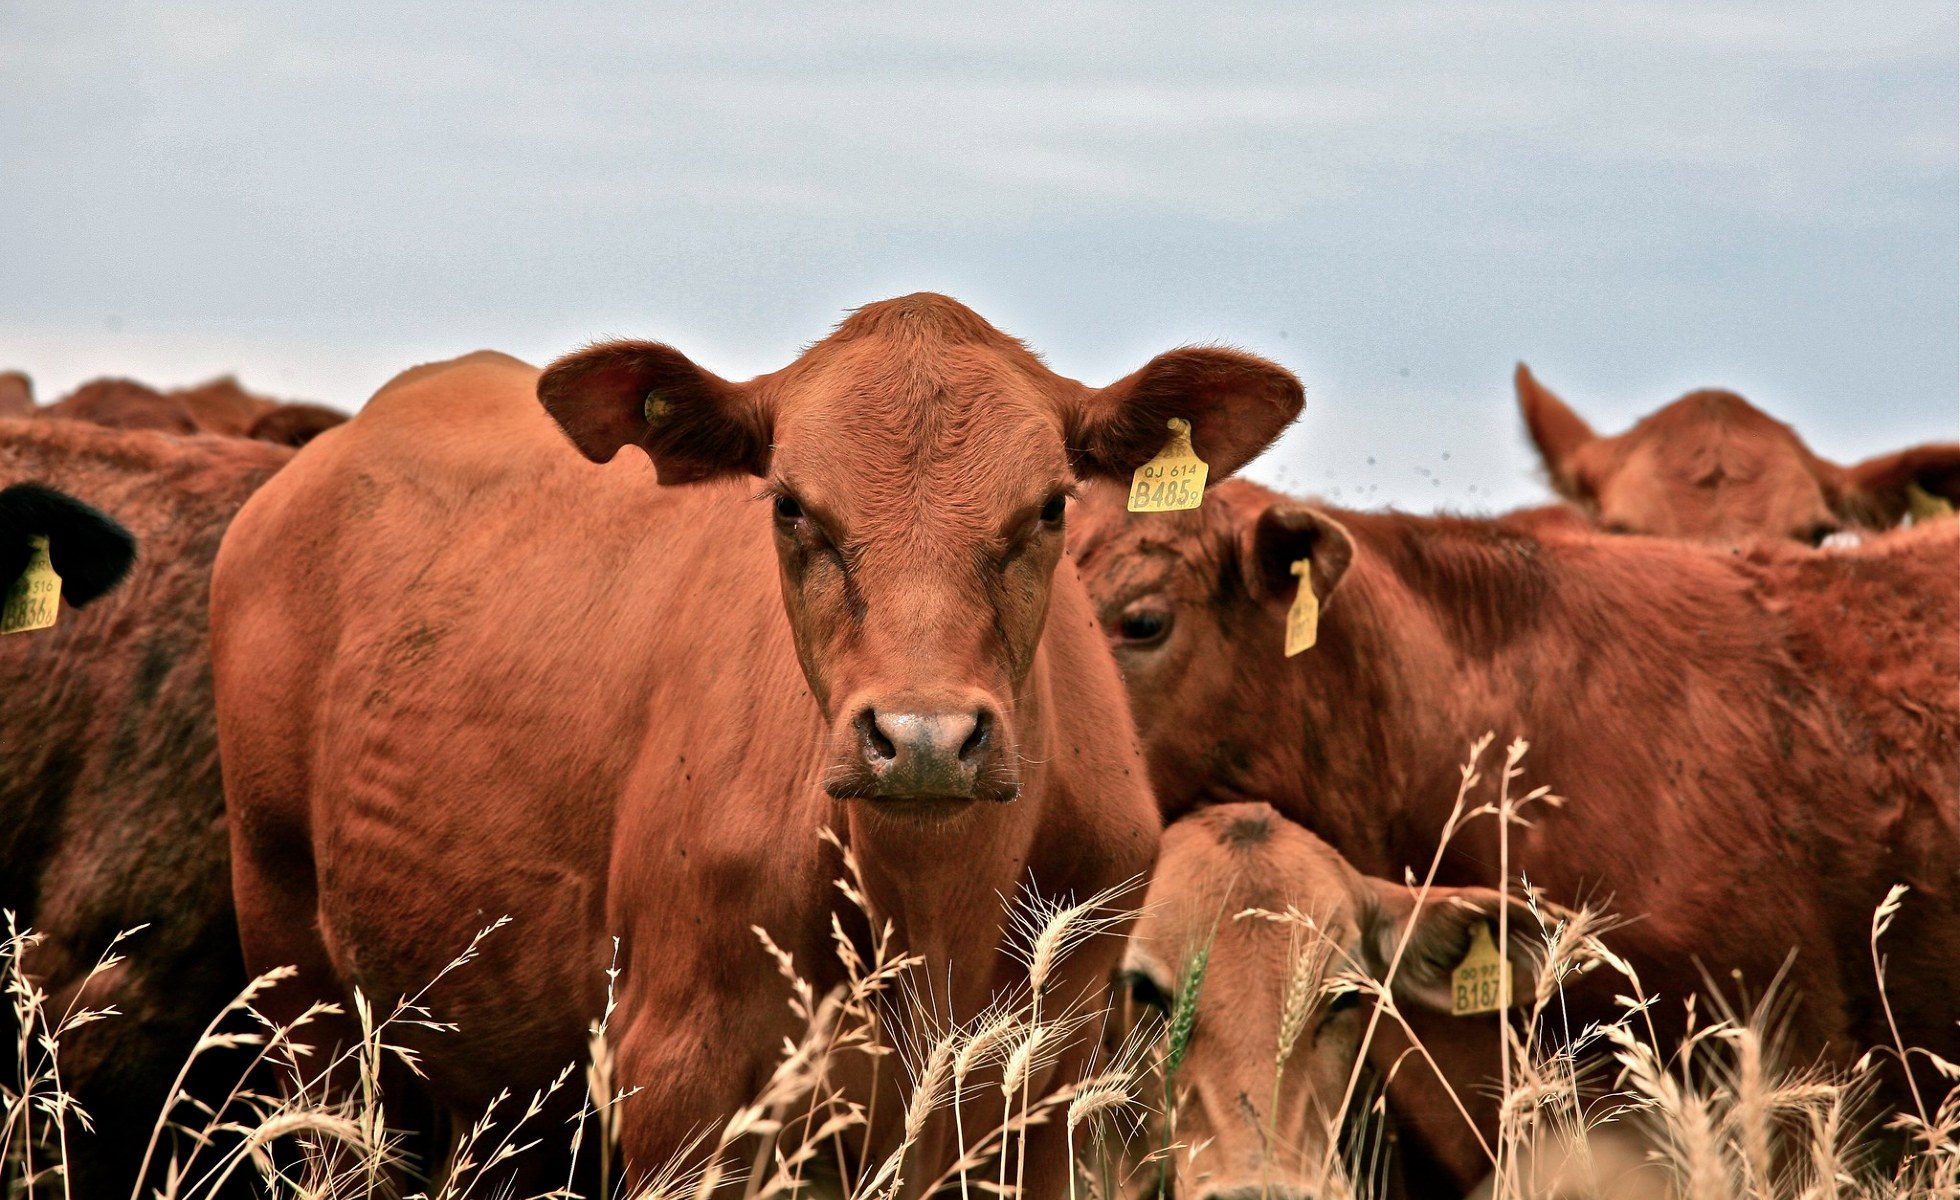 Several cattle standing in a grain field. One is looking directly at camera.